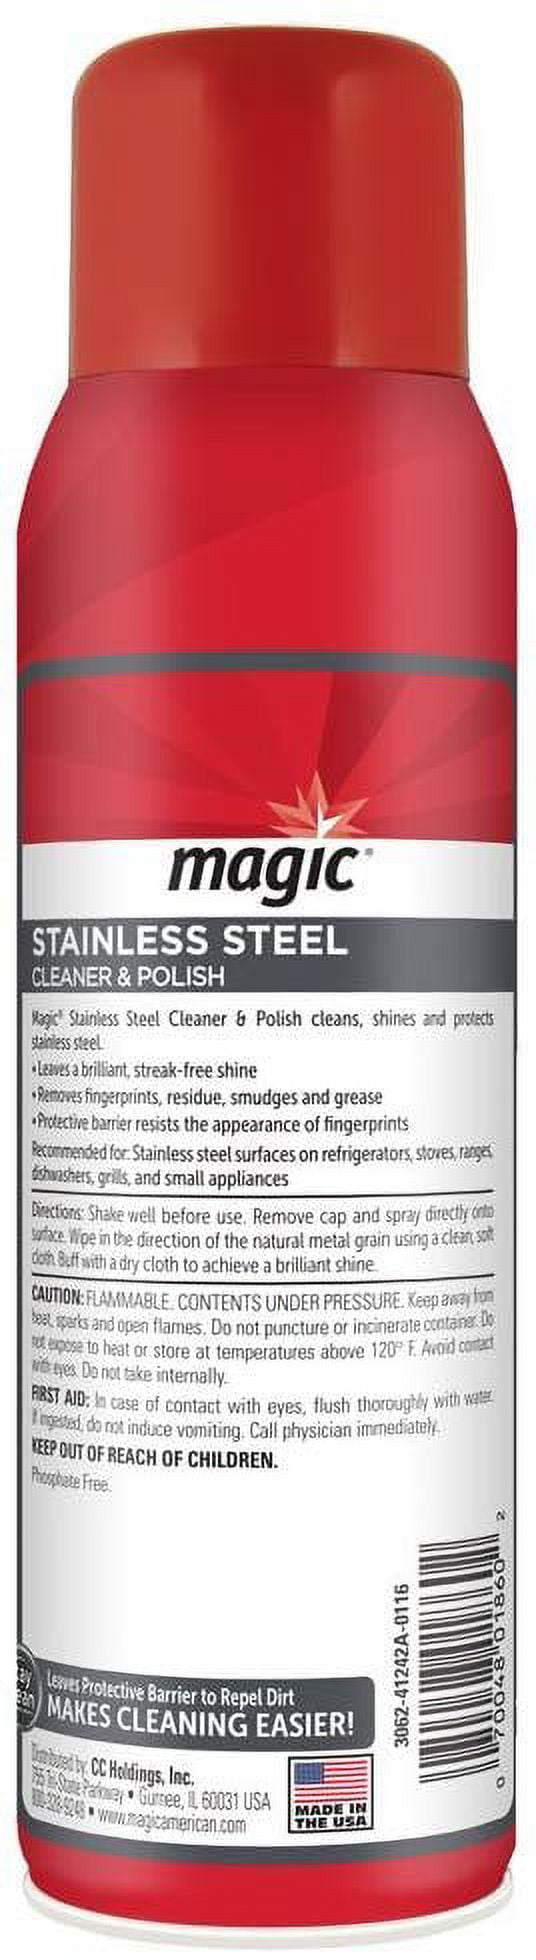 EASY-OFF Stainless Steel Cleaner and Polish, 17 oz Aerosol Spray (76461)